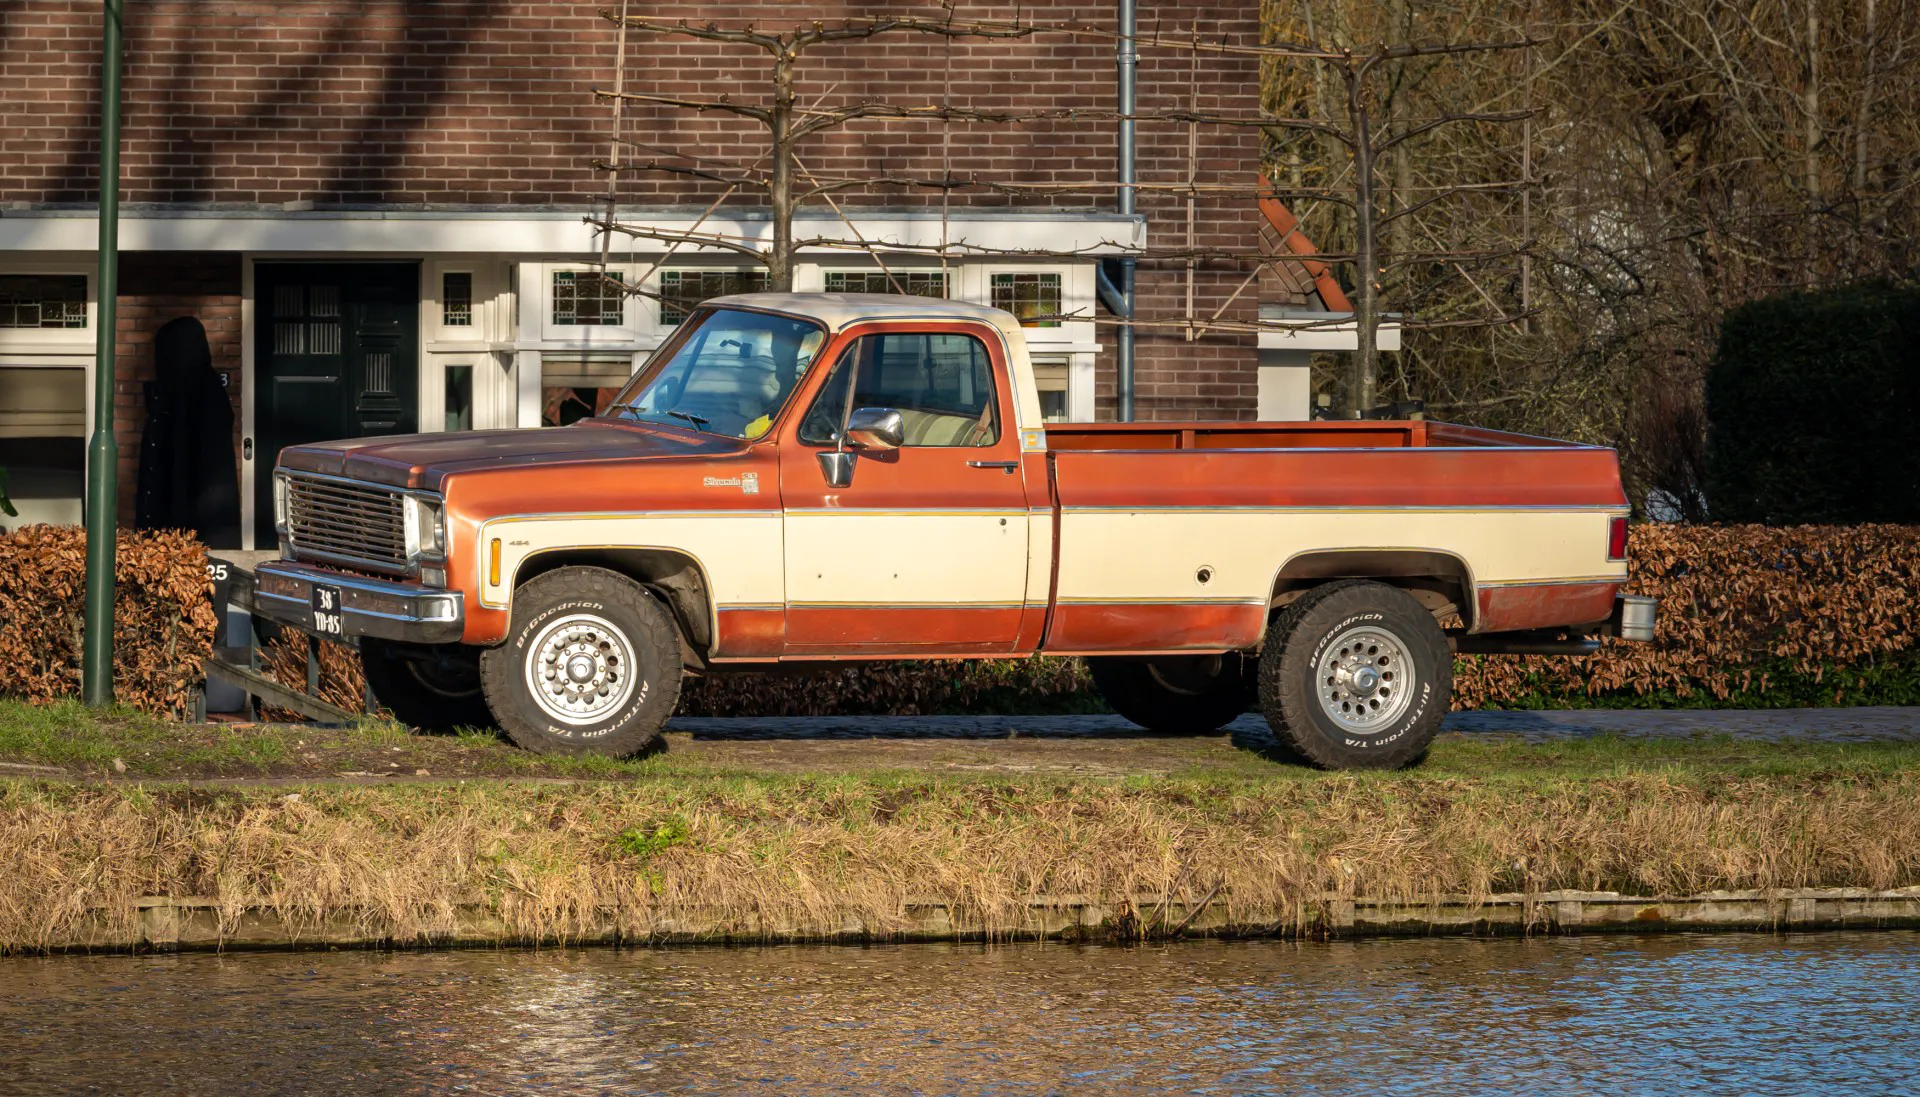 Schoonhoven, The Netherlands, 28.01.2024, Side view of classic pickup truck Chevrolet C 30 Silverado from 1976
By Milos